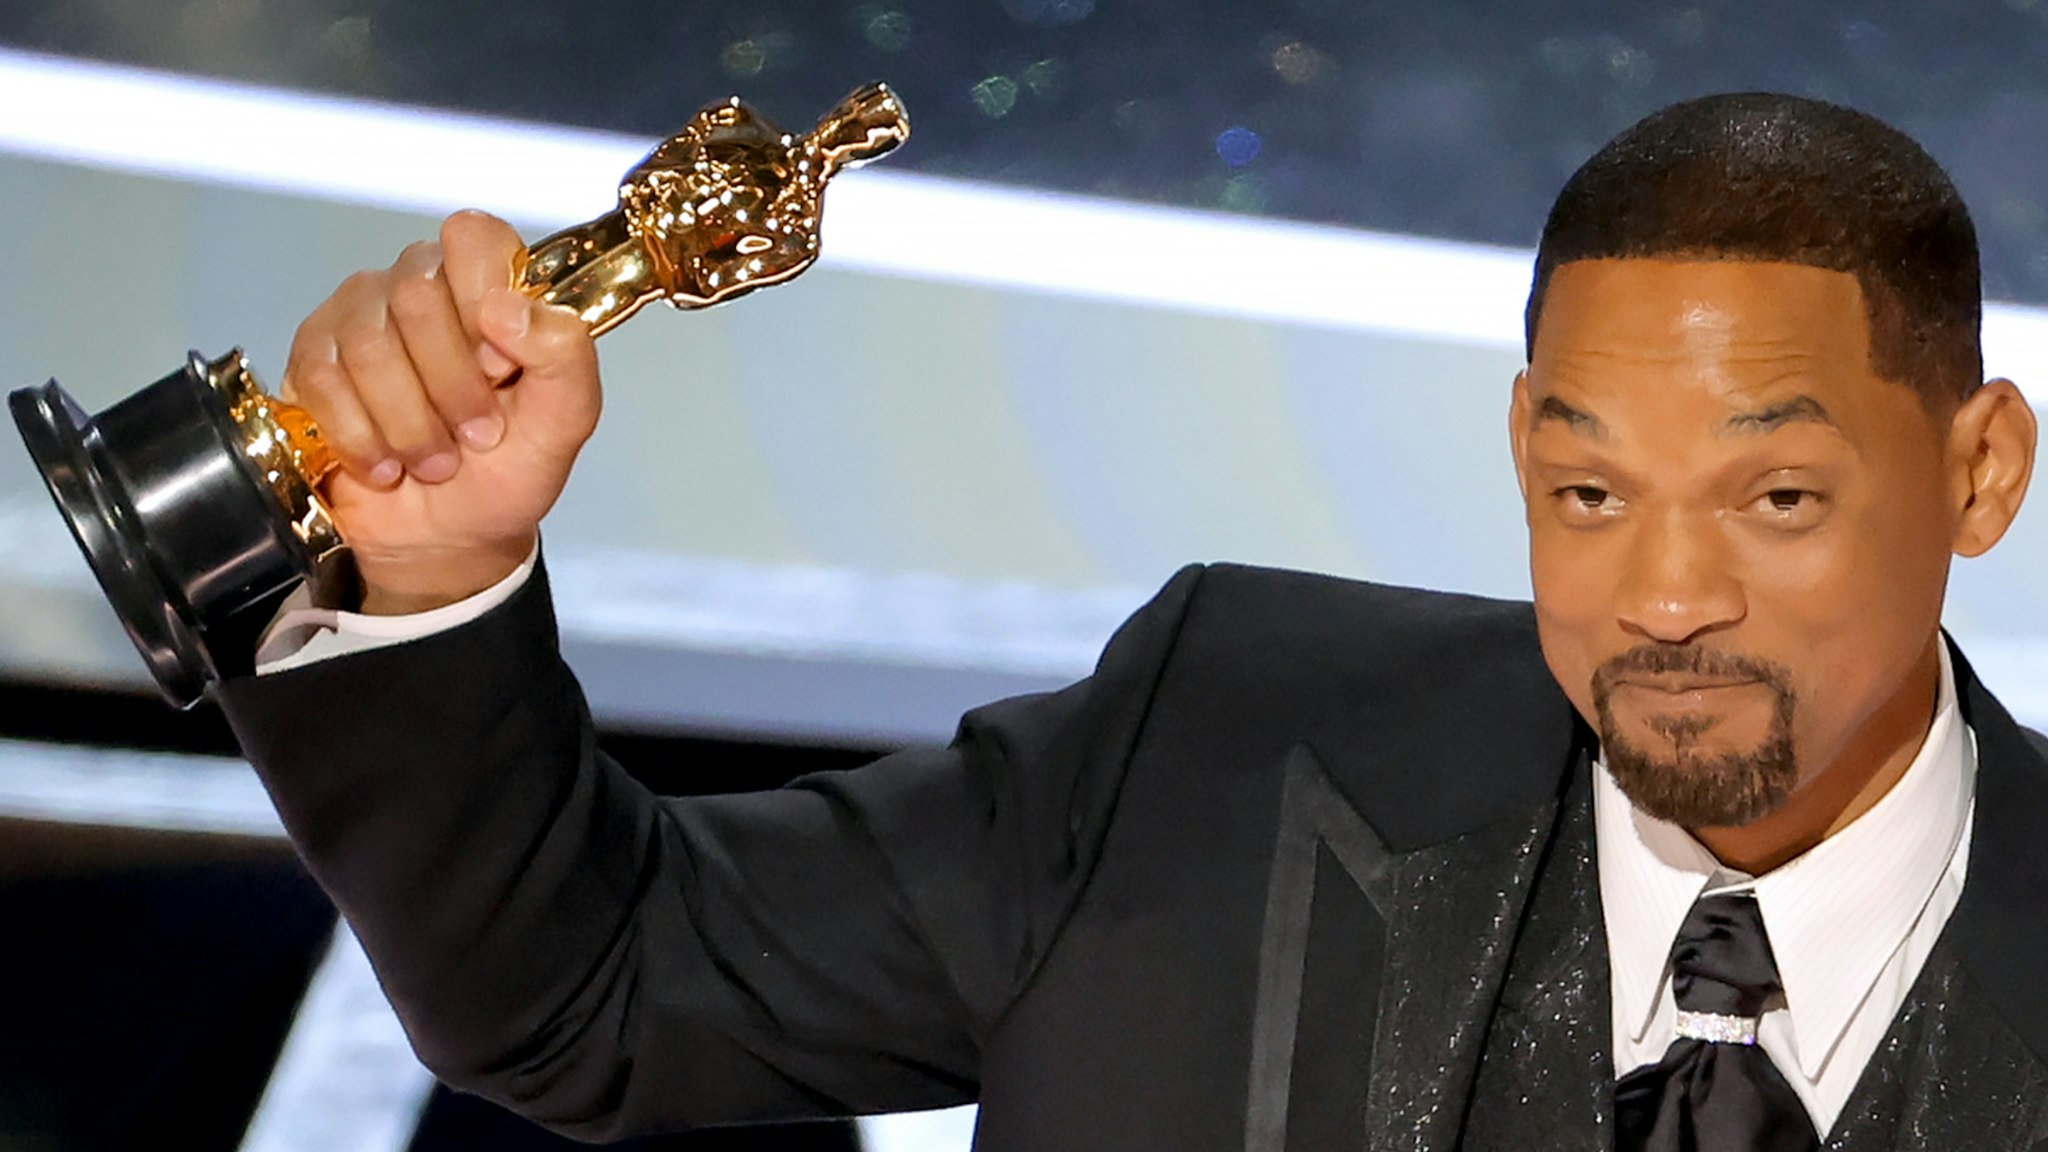 Will Smith accepts the Actor in a Leading Role award for ‘King Richard’ onstage during the 94th Annual Academy Awards at Dolby Theatre on March 27, 2022 in Hollywood, California.